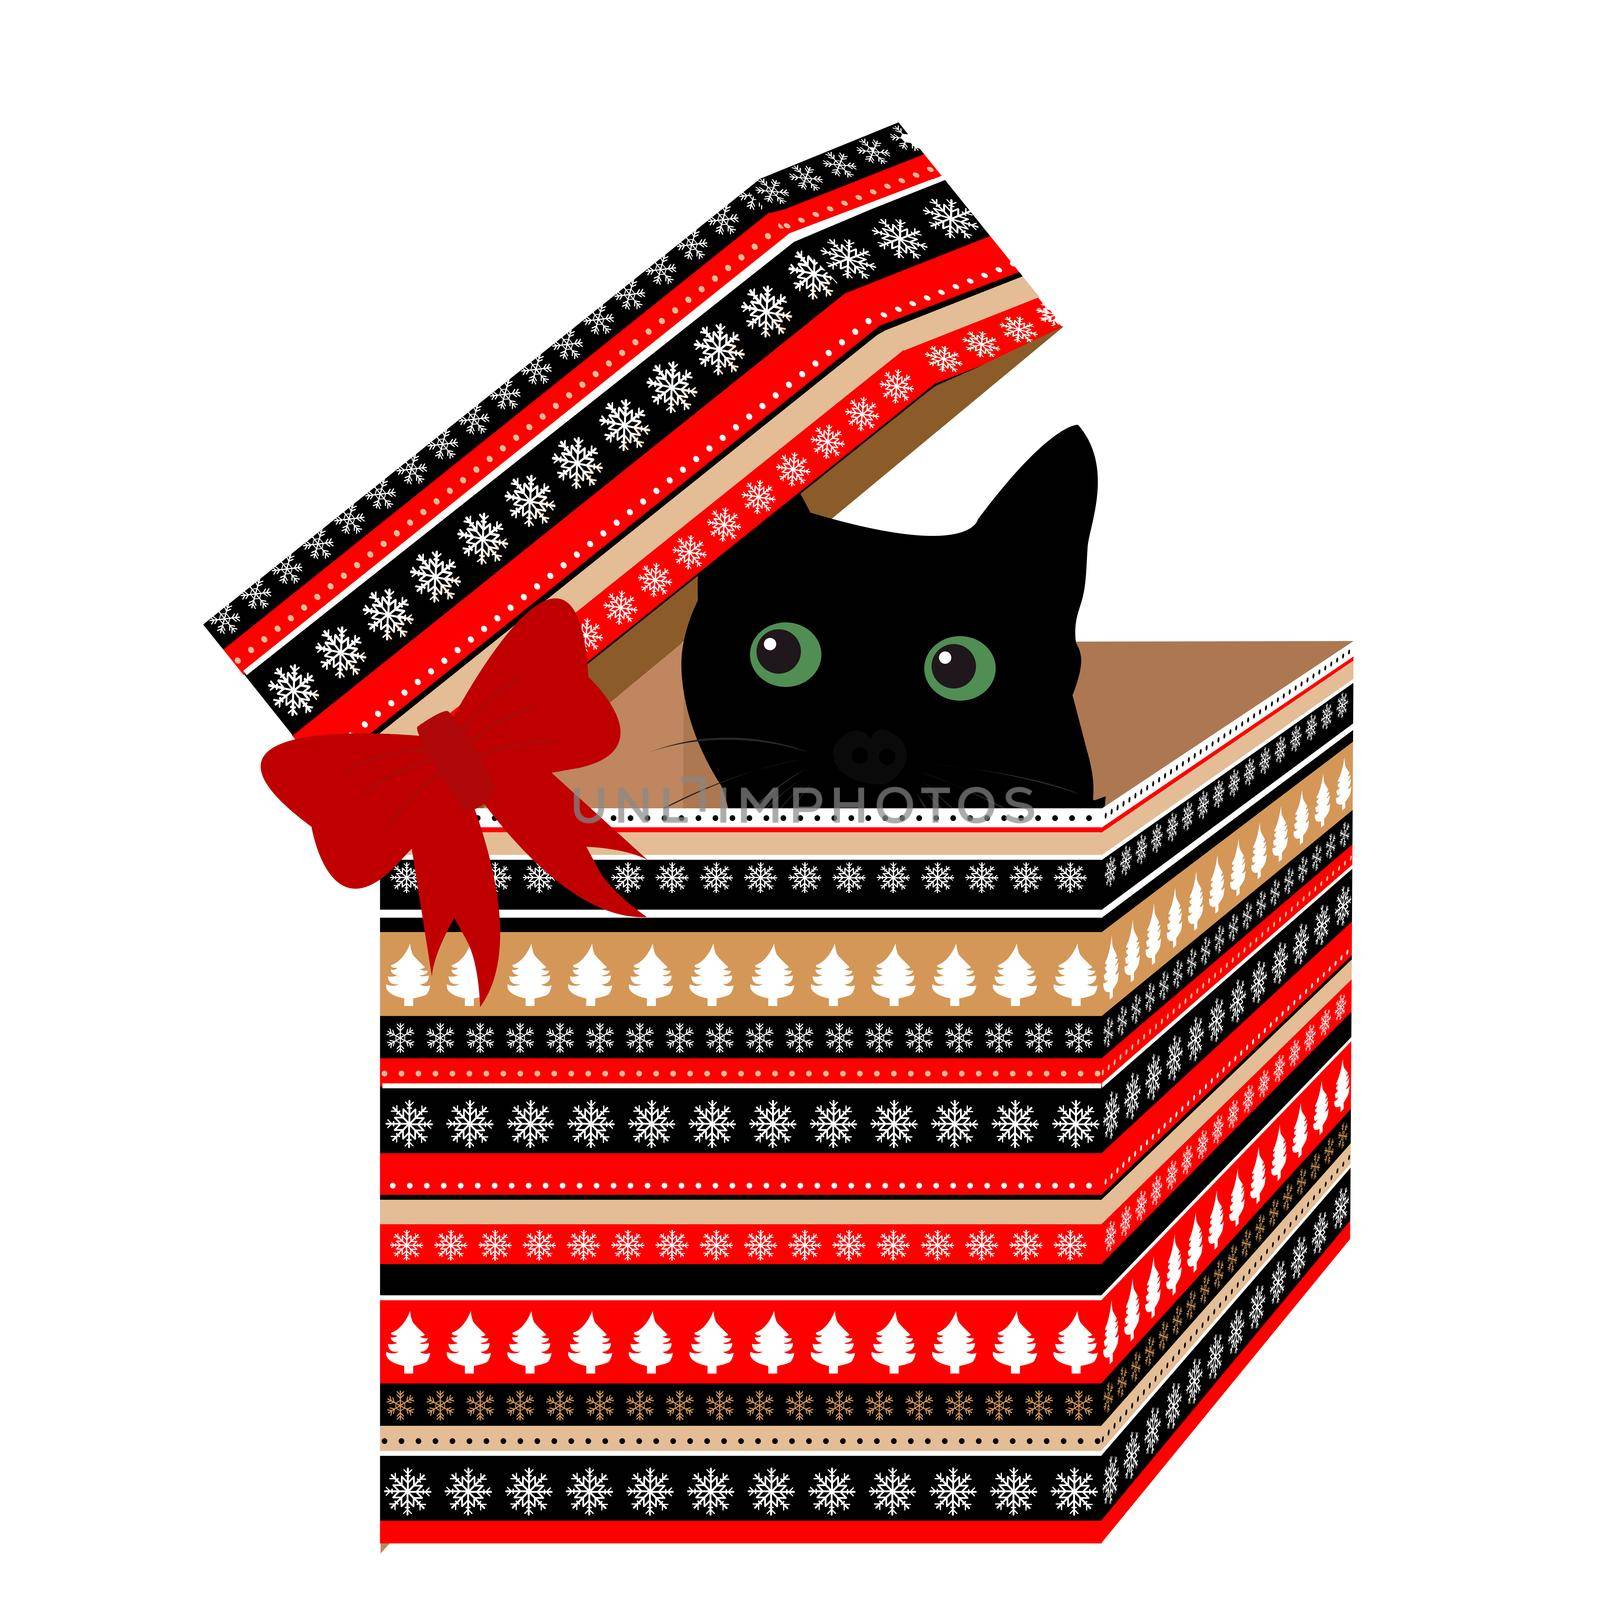 Gift box for Christmas with black cat in it by hibrida13